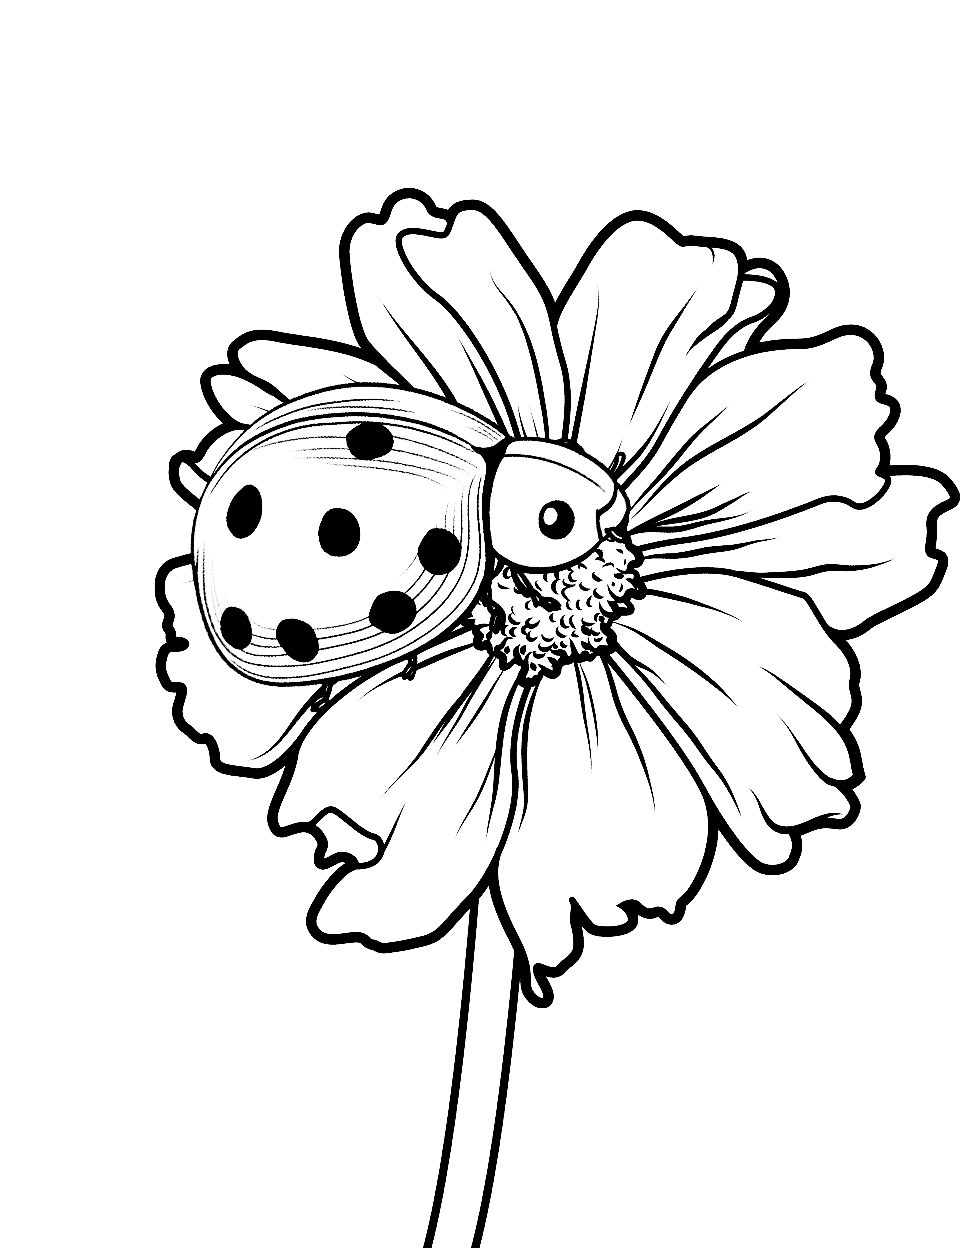 Ladybug Enjoying a Peaceful Day Coloring Page - A ladybug sitting peacefully on a small flower.